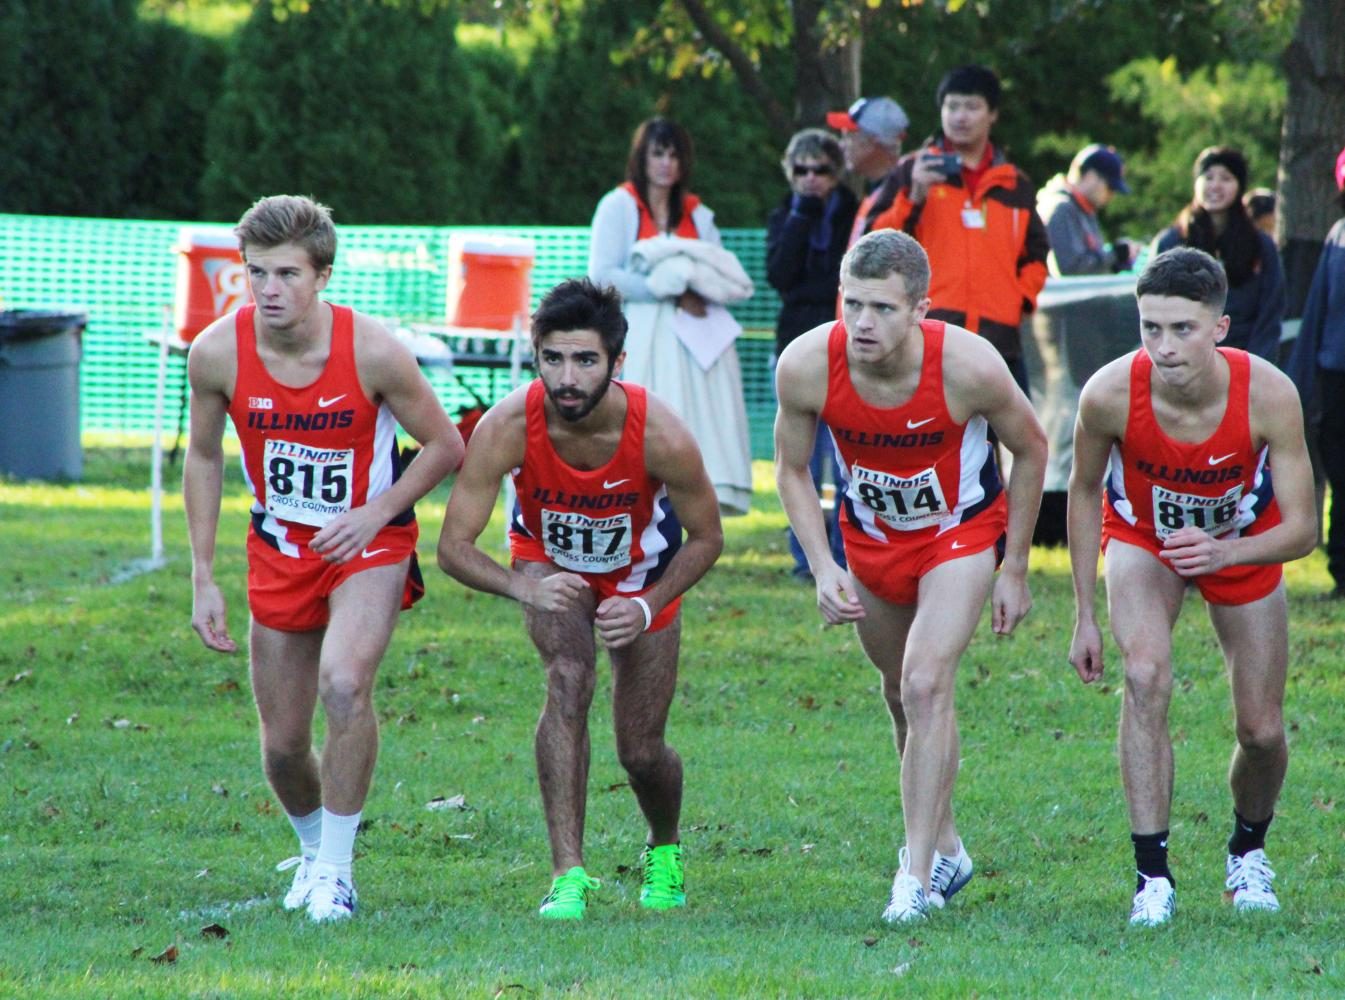 Lining up before the race begins, runners Joe Crowlin, Garrett Lee, Luke Brahm, and Caleb Hummer stand ready to run as soon as the gunshot goes off. The Illini runners stayed together for the first two laps, but as the third one came, Lee pushed to second, Crowlin followed behind in third, Brahm in eighth, and Hummer rounded them out in nineteenth. The Illini Open was held at the Arboretum on October 21st, 2016.